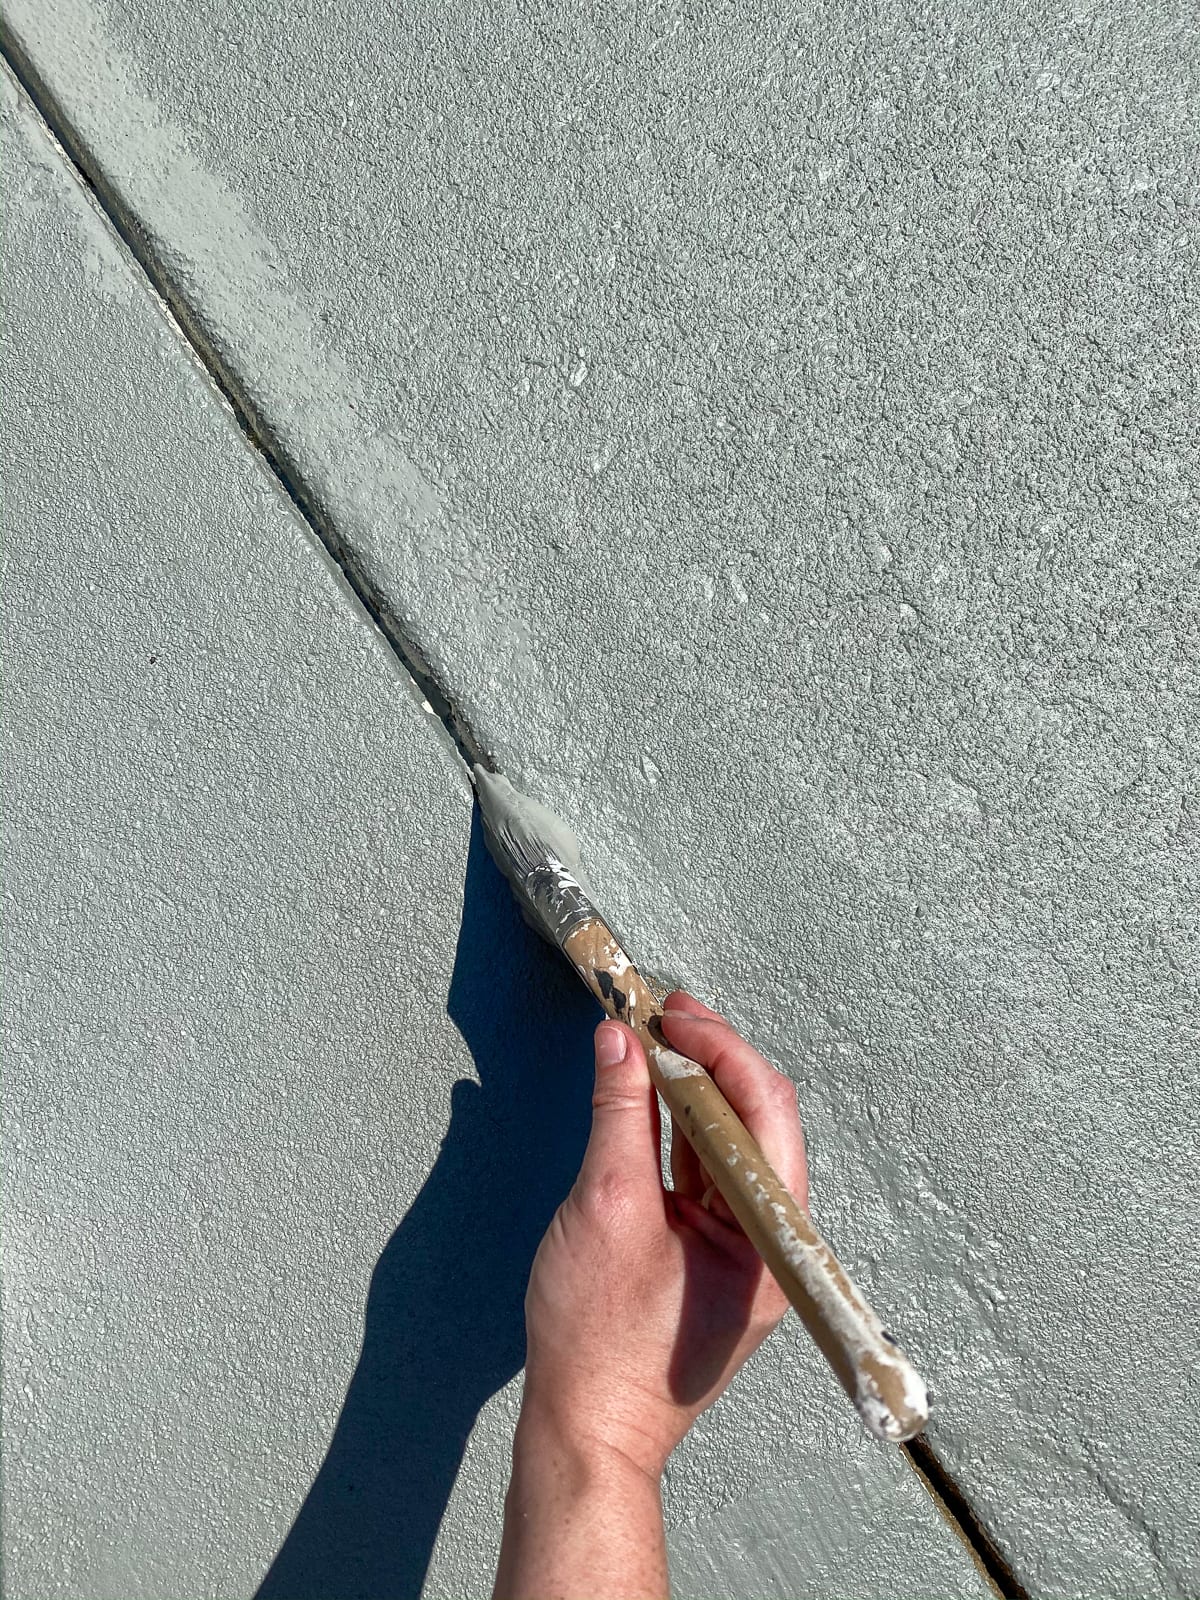 applying concrete paint in cracks and edges to finish a patio